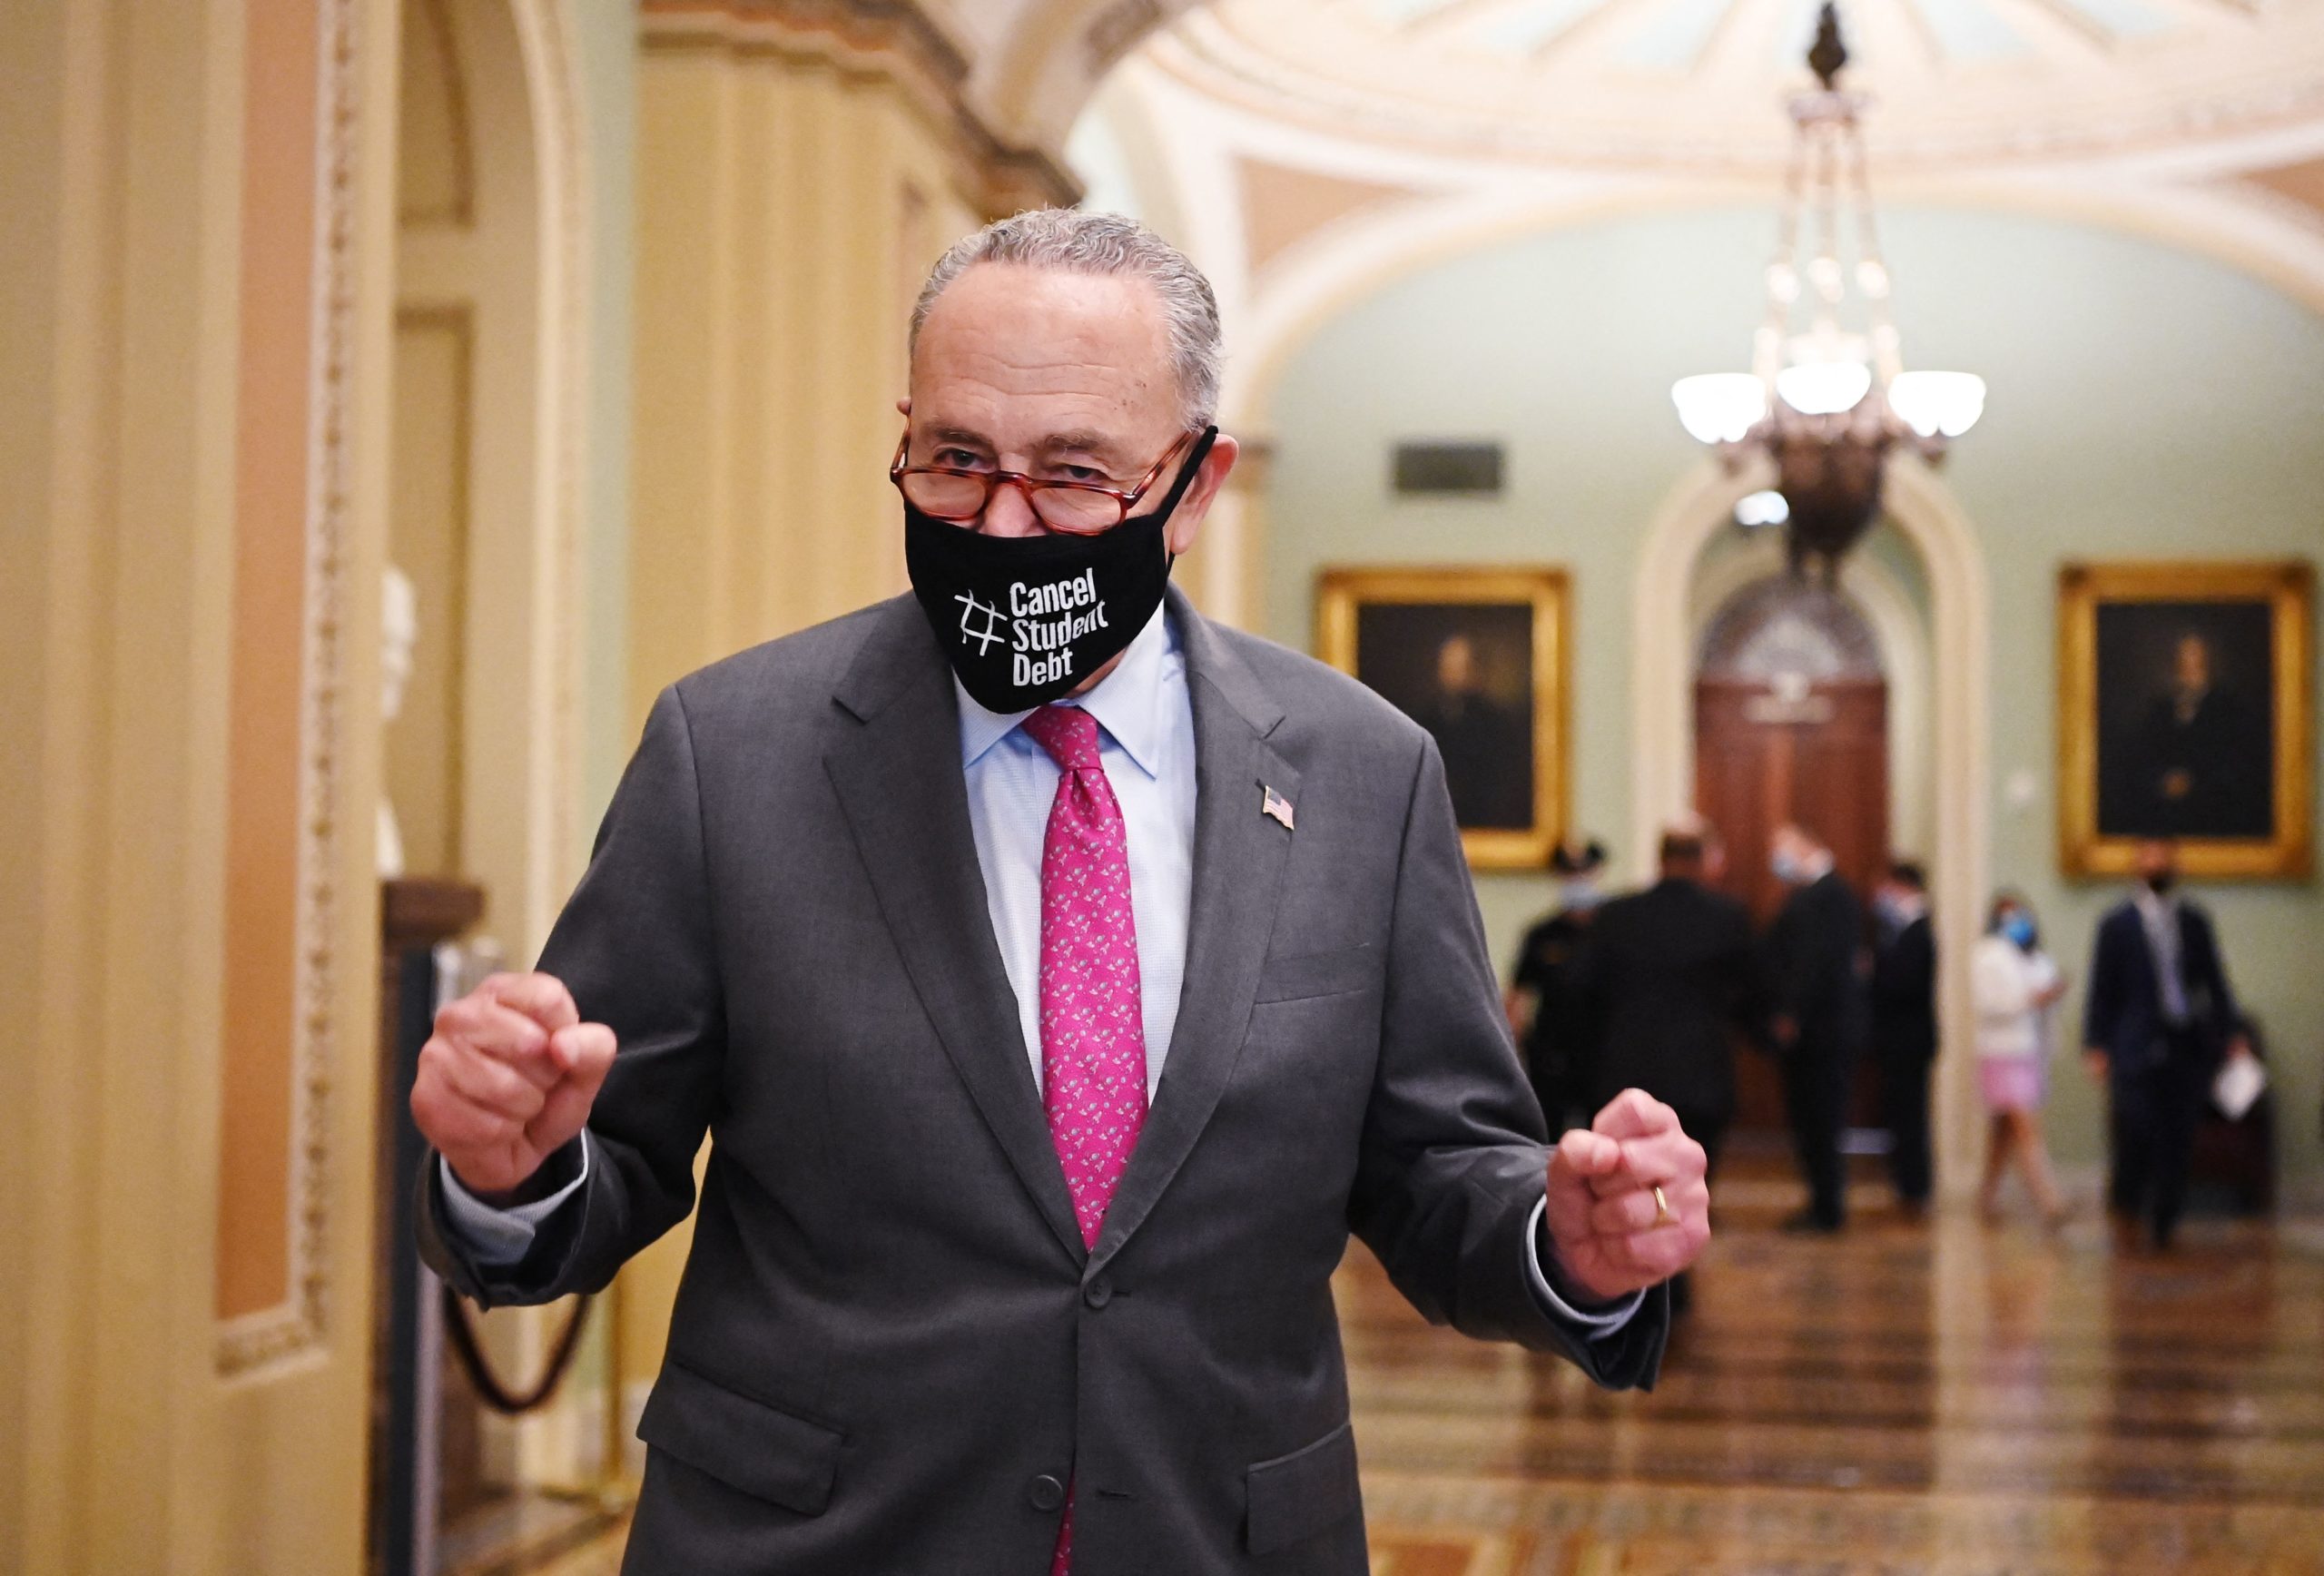 Majority Leader Chuck Schumer exits the Senate chamber after the Senate passed the infrastructure bill with 69 votes. (MANDEL NGAN/AFP via Getty Images)